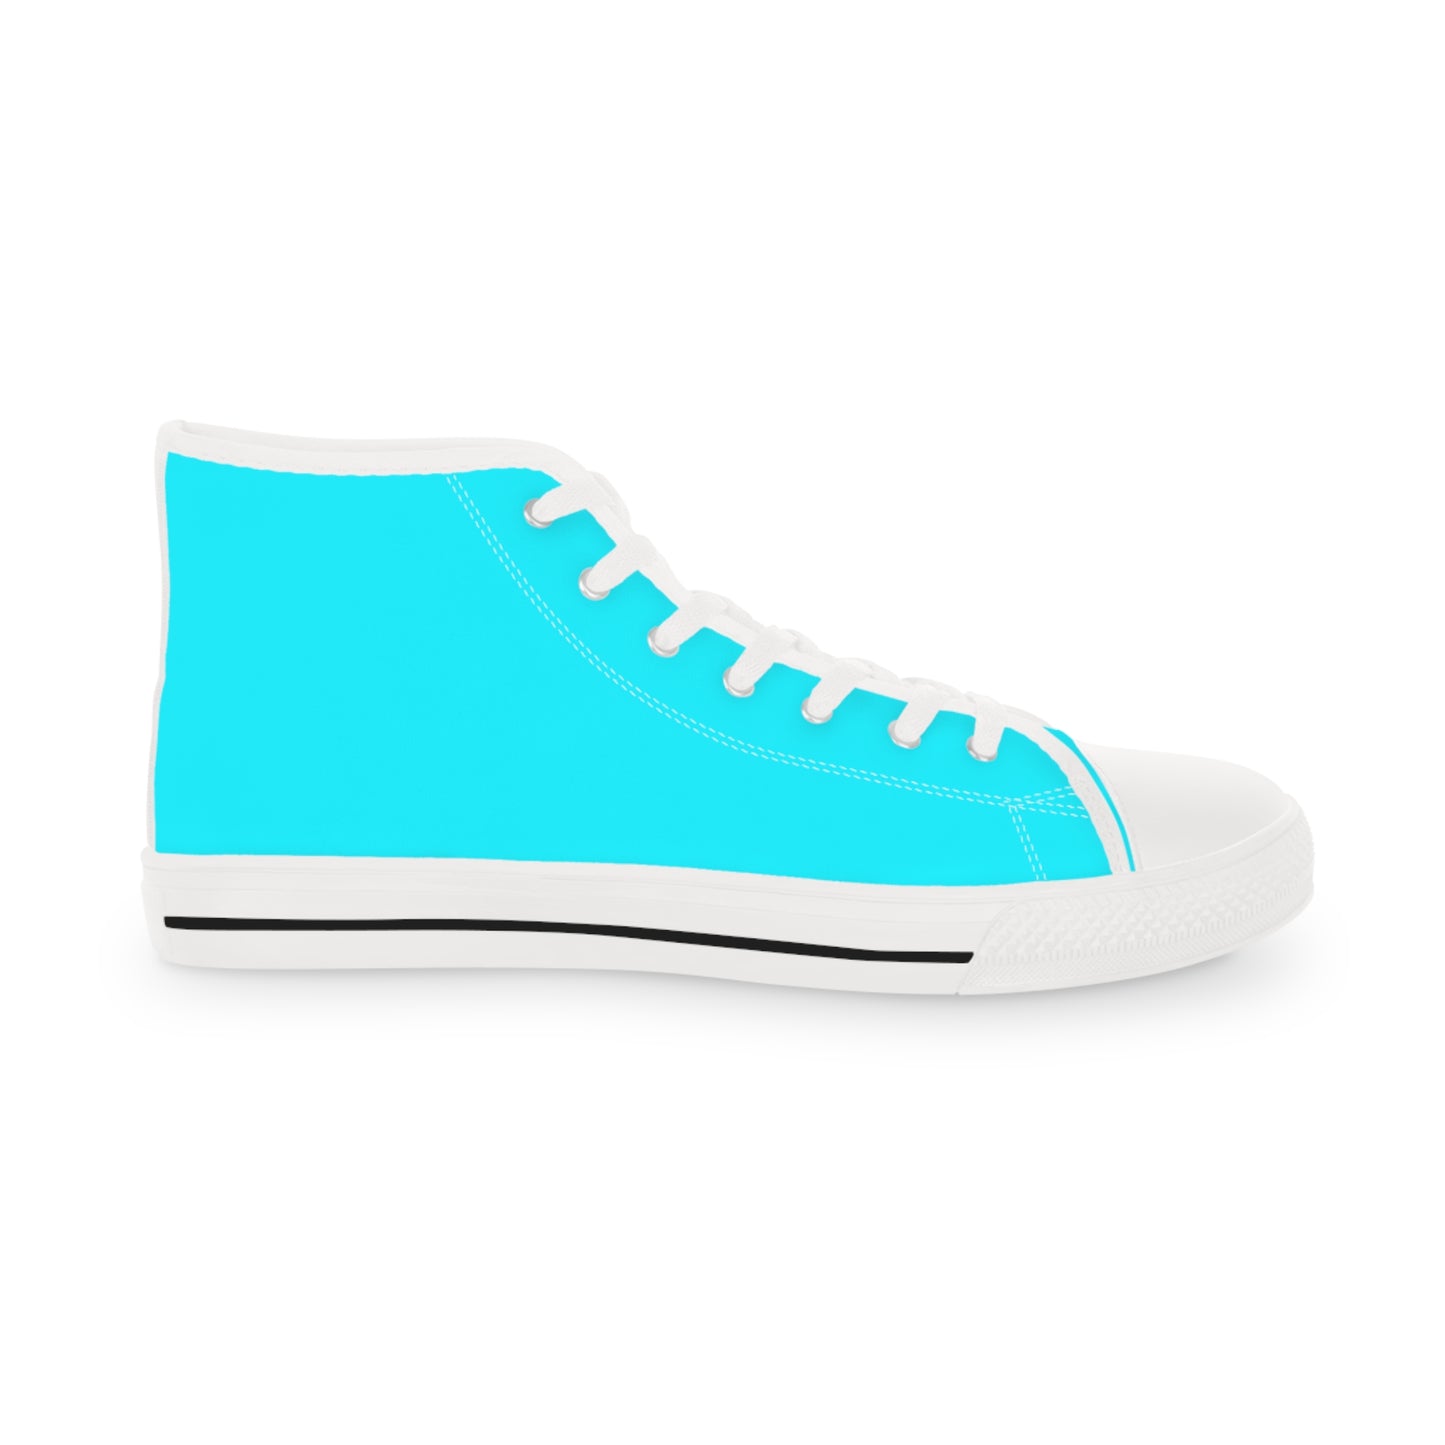 Men's Canvas High Top Solid Color Sneakers - Cool Pool Aqua Blue US 14 White sole